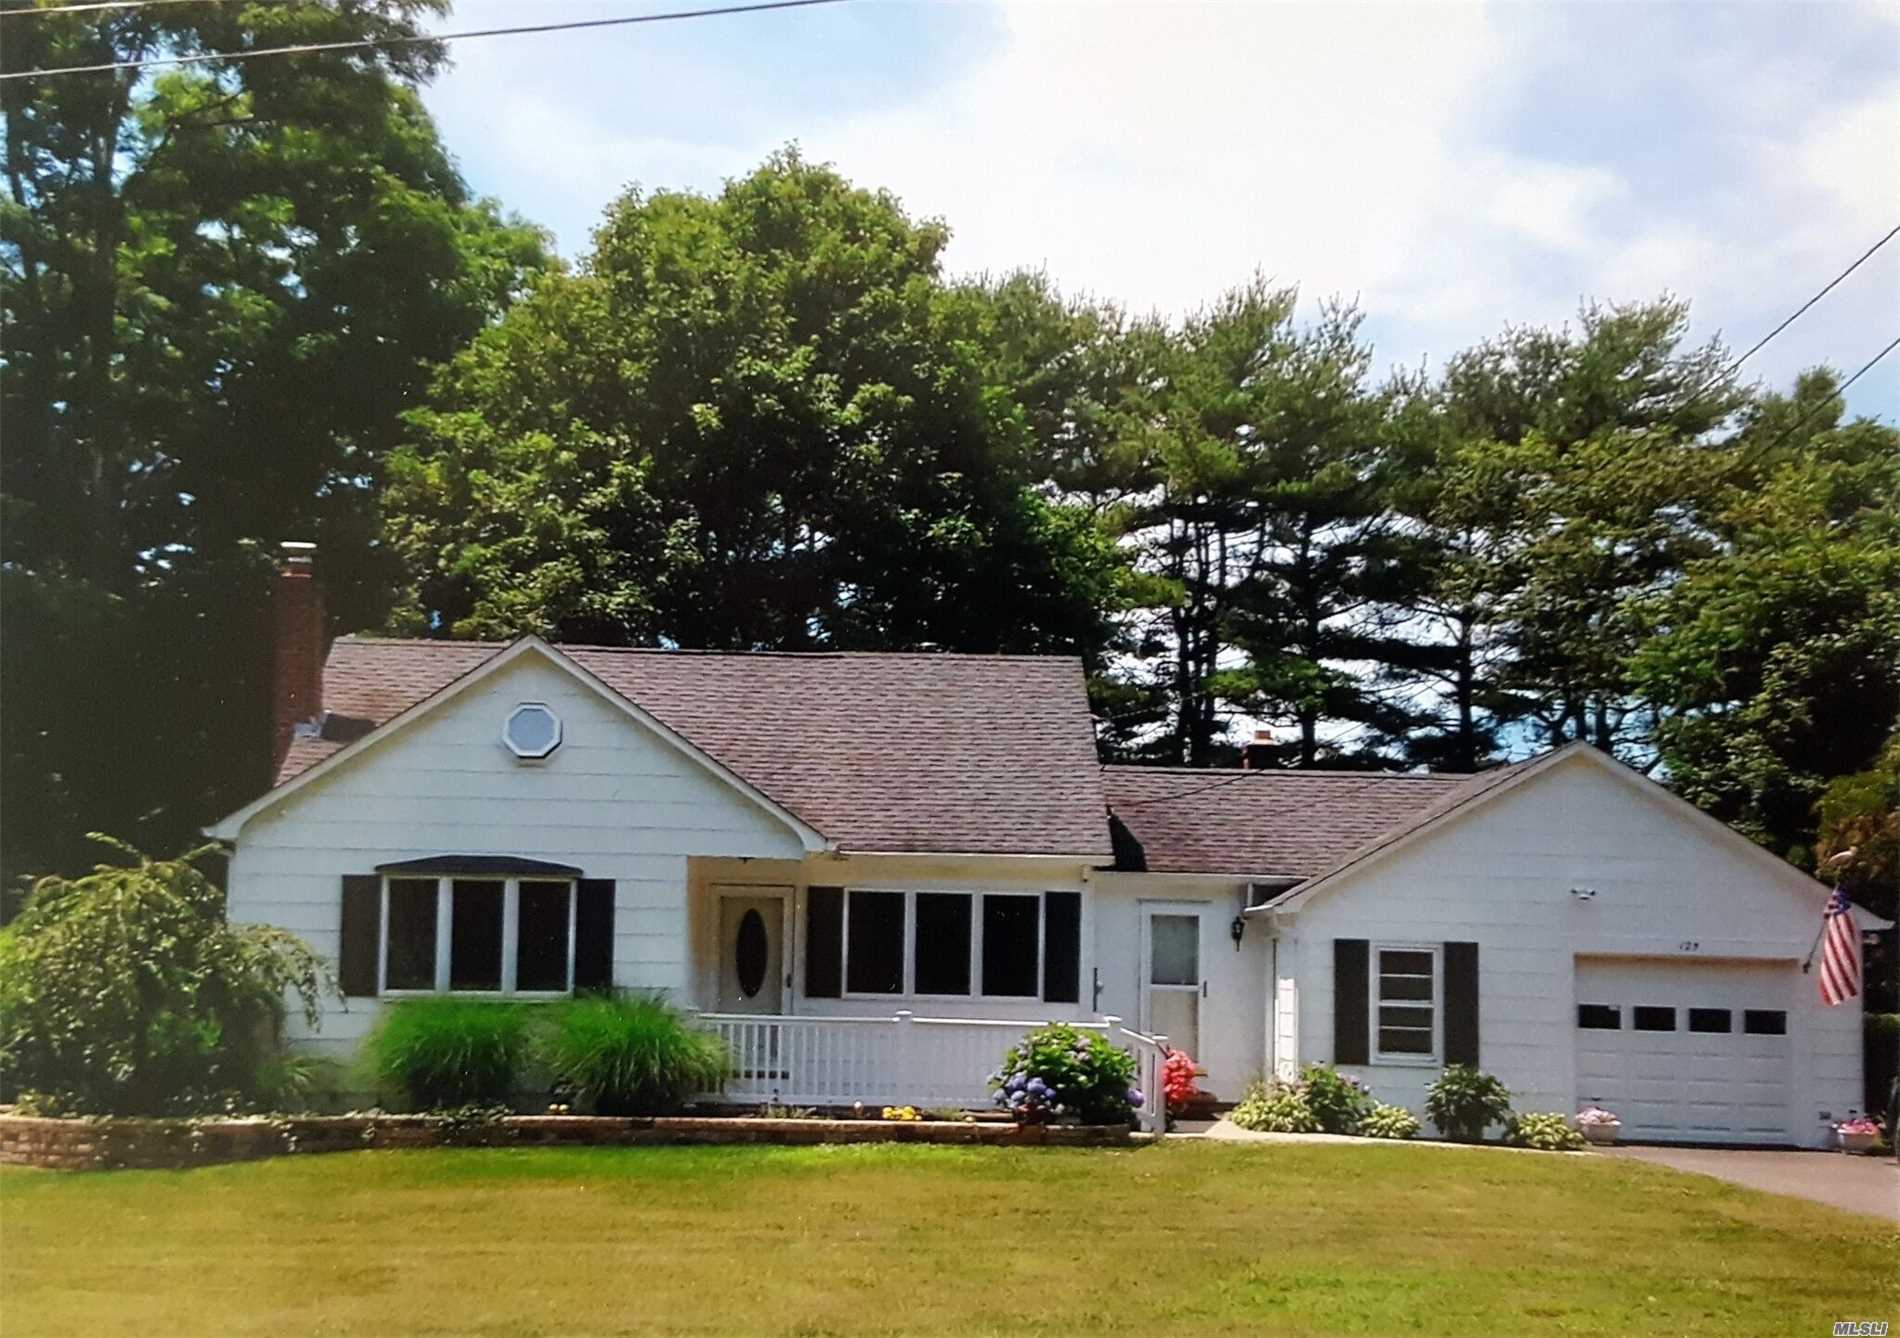 Lovely 3 Br Cape Cod! Move In Ready. Immaculate Condition Throughout. Pride Of Ownership. All Mechanicals Very New & Up To Date. New Bathroom/Radiant Heat. Hw Floors Under Carpet. Newer Shed On Property. New Roof & Windows. Close To Beaches, Boating, Wineries, Vineyards & Local Breweries. Convenient To Public Transportation, Shopping & Hospital.